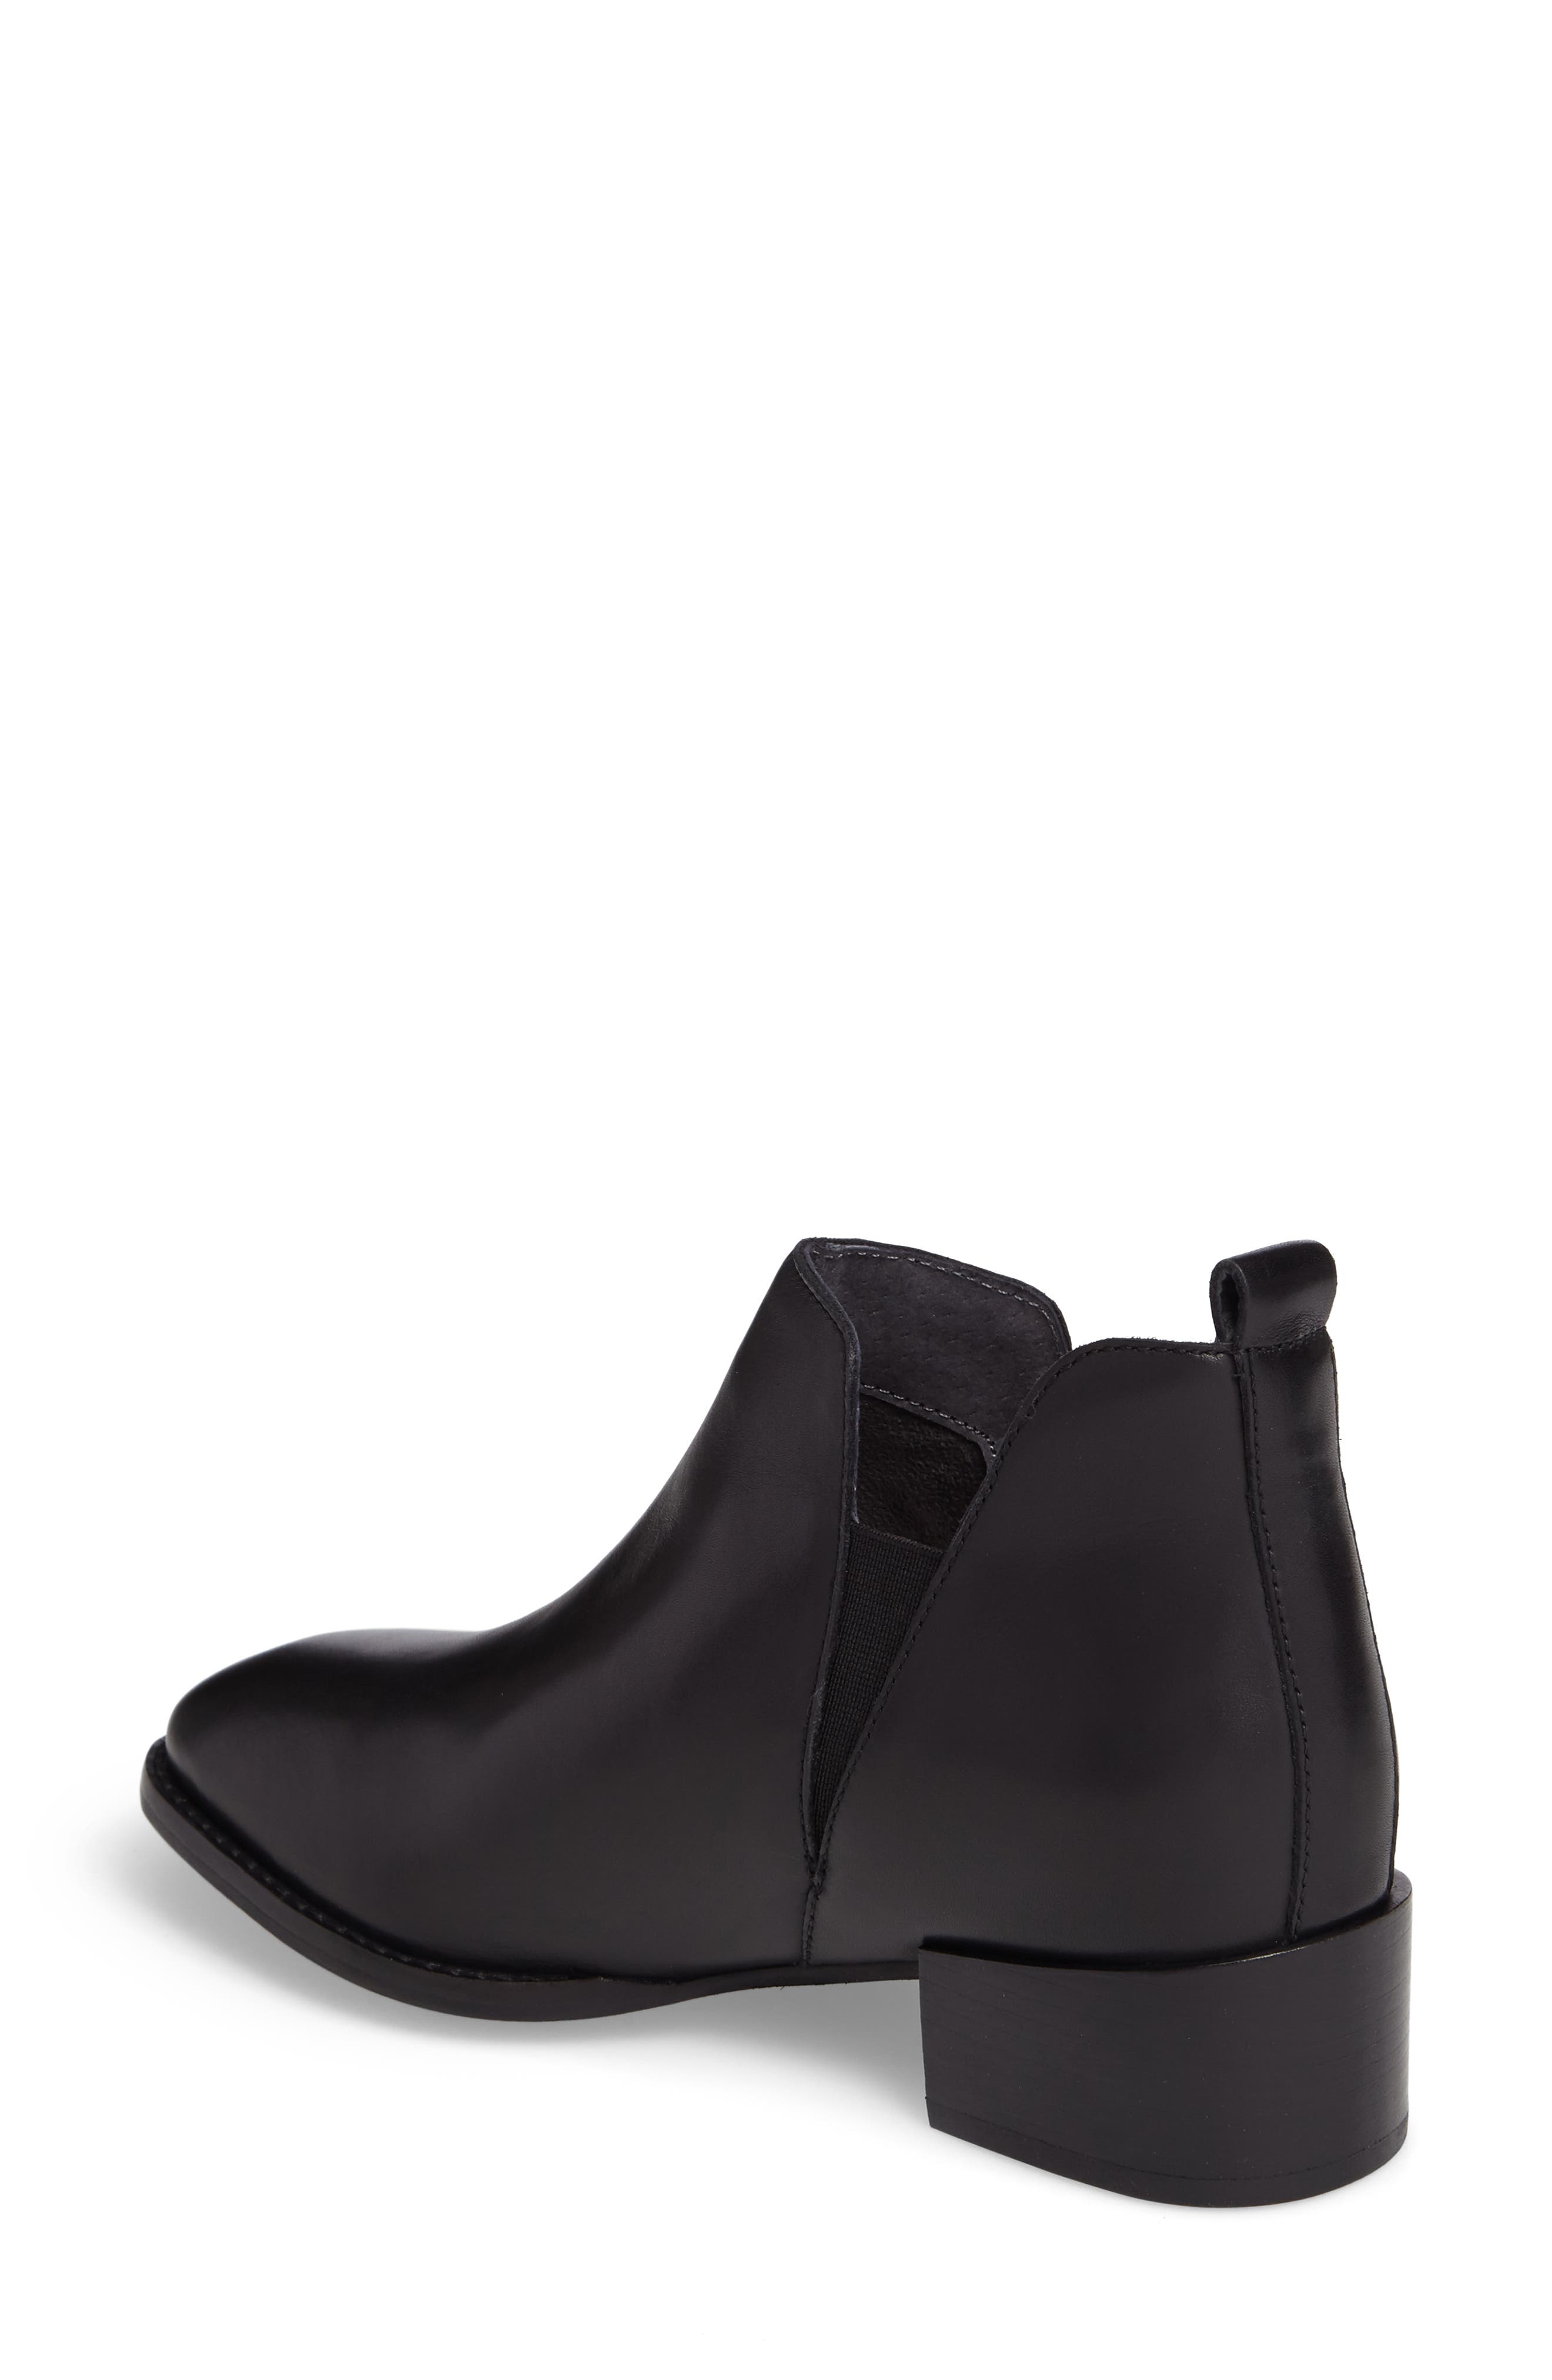 seychelles offstage chelsea boots black